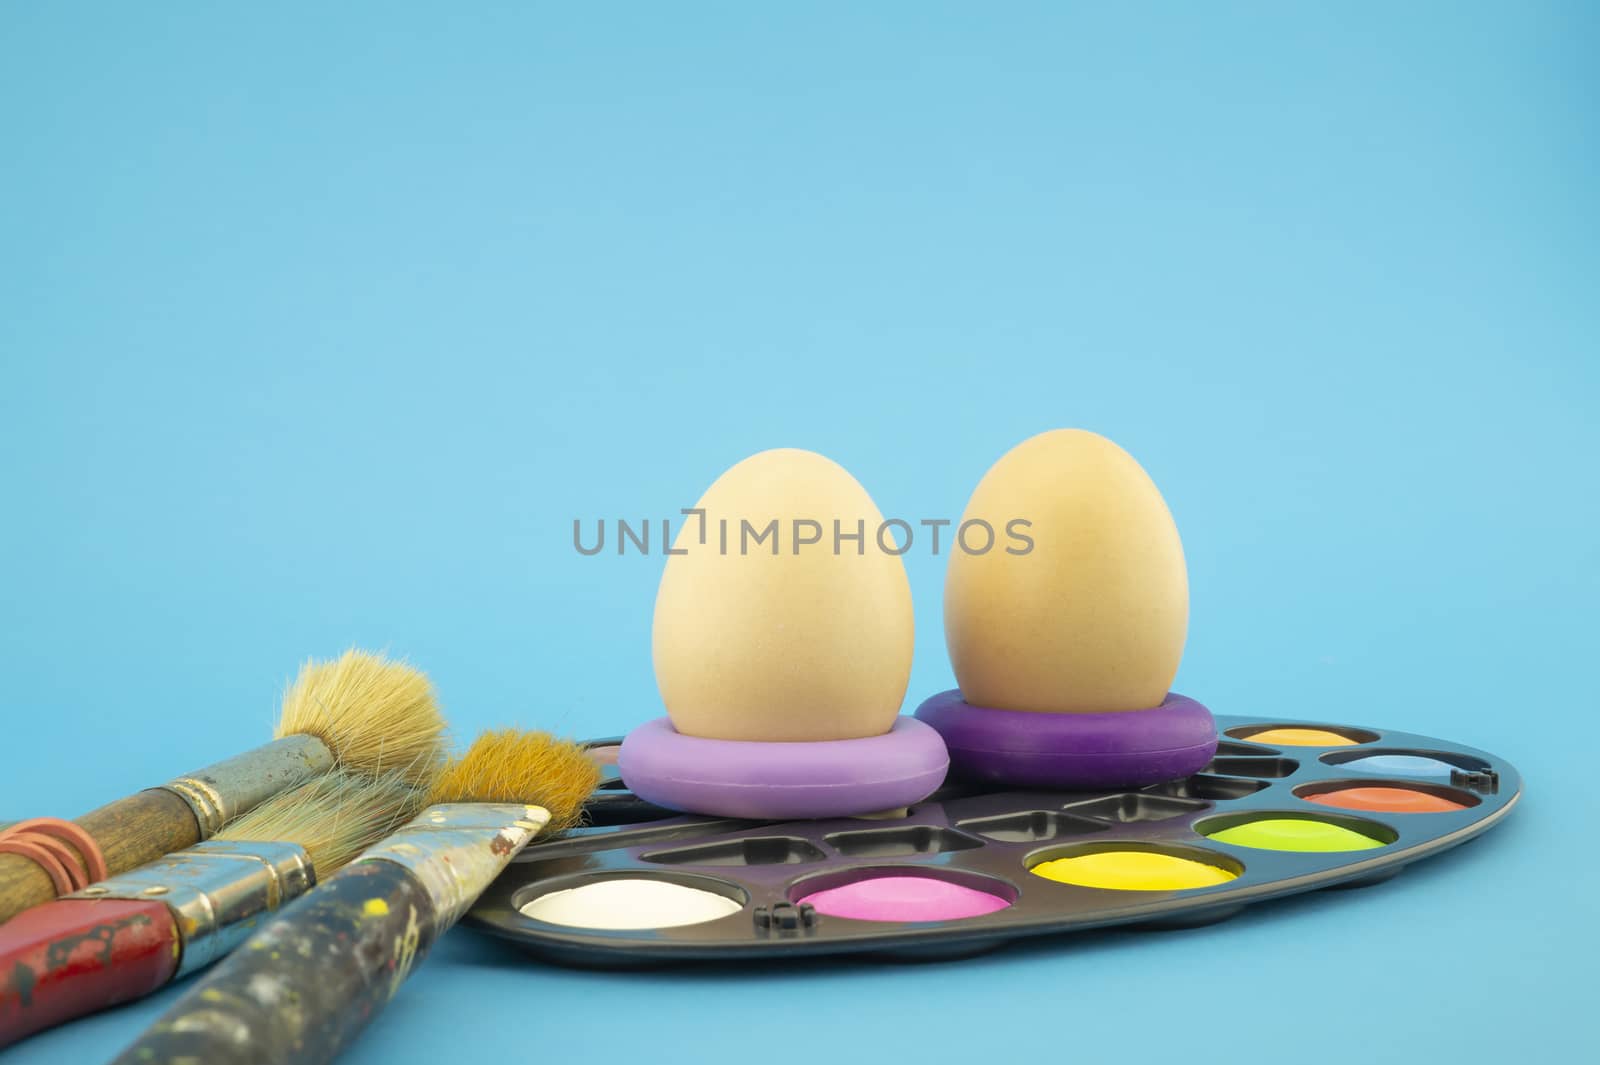 Easter eggs coloring concept with three unpainted eggs and set of different paint brushes, on blue background